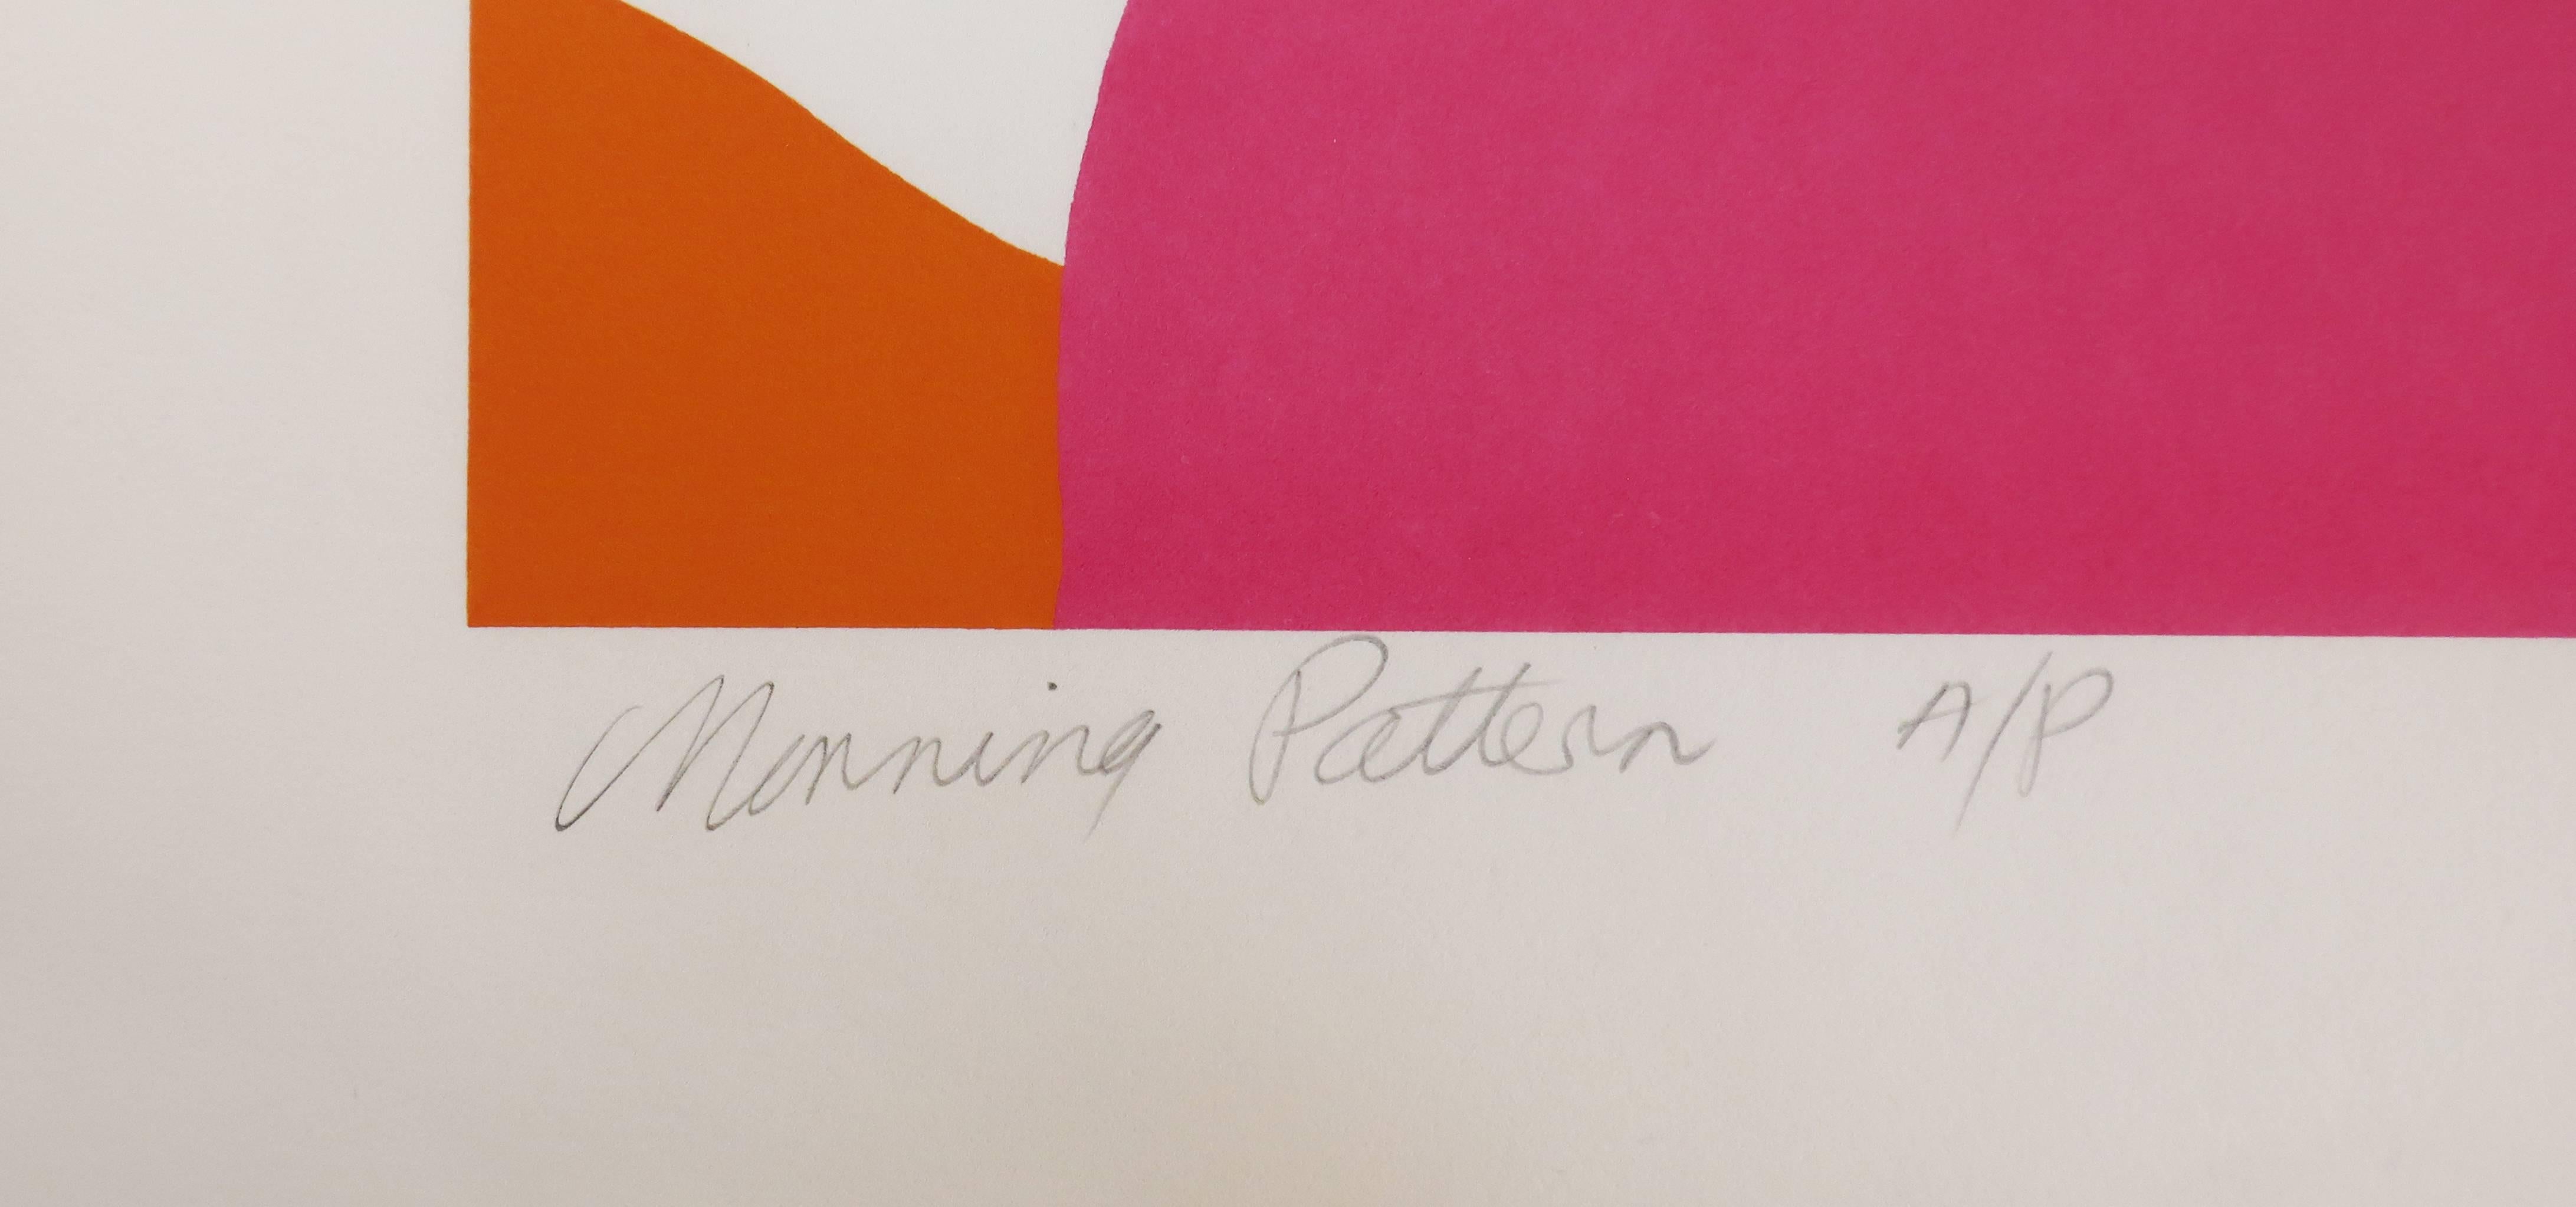 A Michael Young serigraph (also known as silk screen or screen printing), “Morning Pattern” is a vibrantly colored representation of a naked women reclining in bed. Signed in pencil by the artist and marked as an artist’s proof (AP).
 